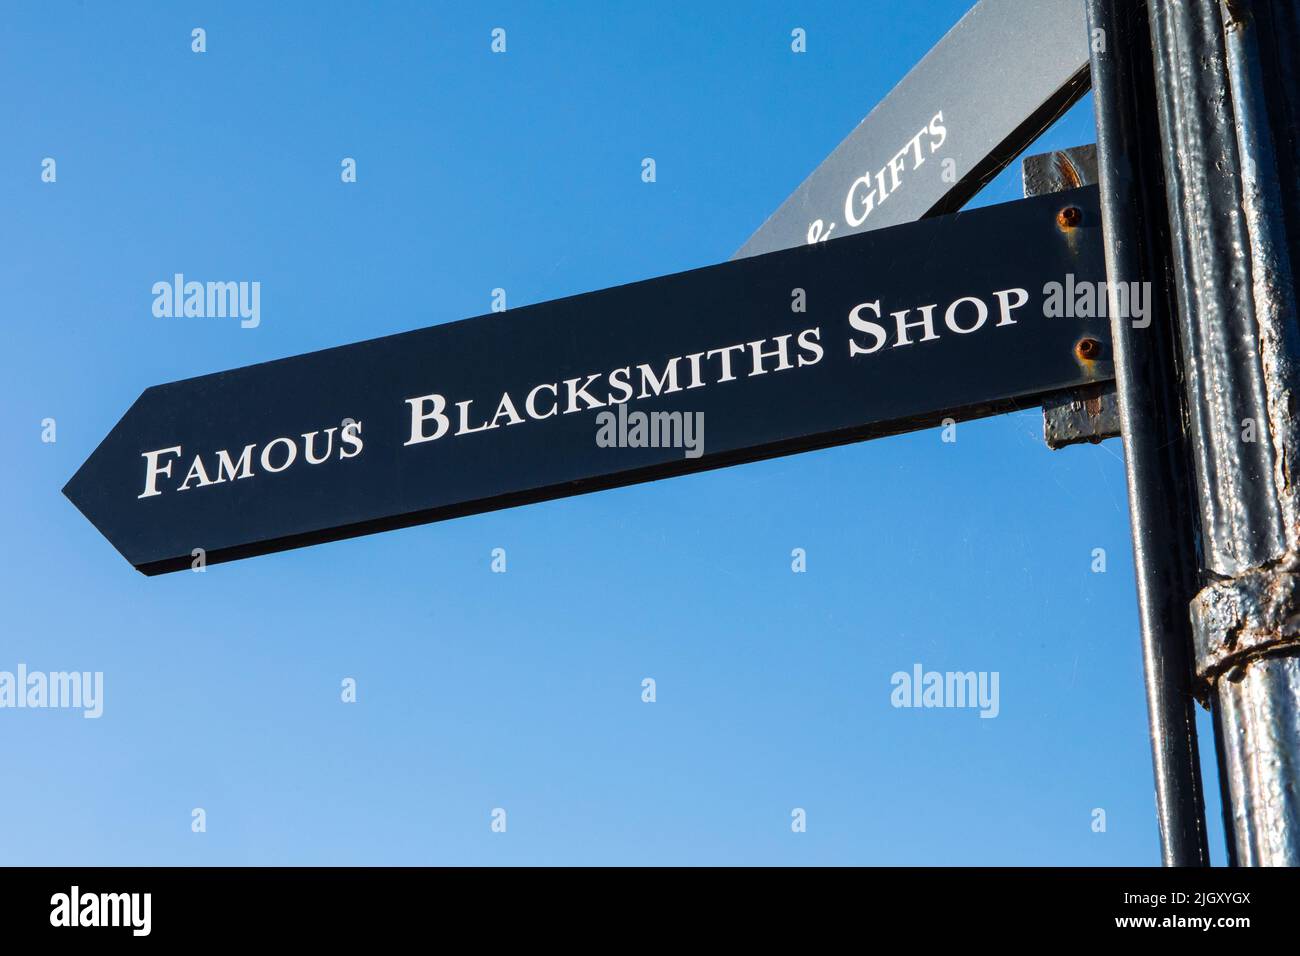 Gretna Green, Scotland - October 15th 2021: A signpost pointing visitors to the direction of the Famous Blacksmiths Shop in Gretna Green, Scotland. Stock Photo